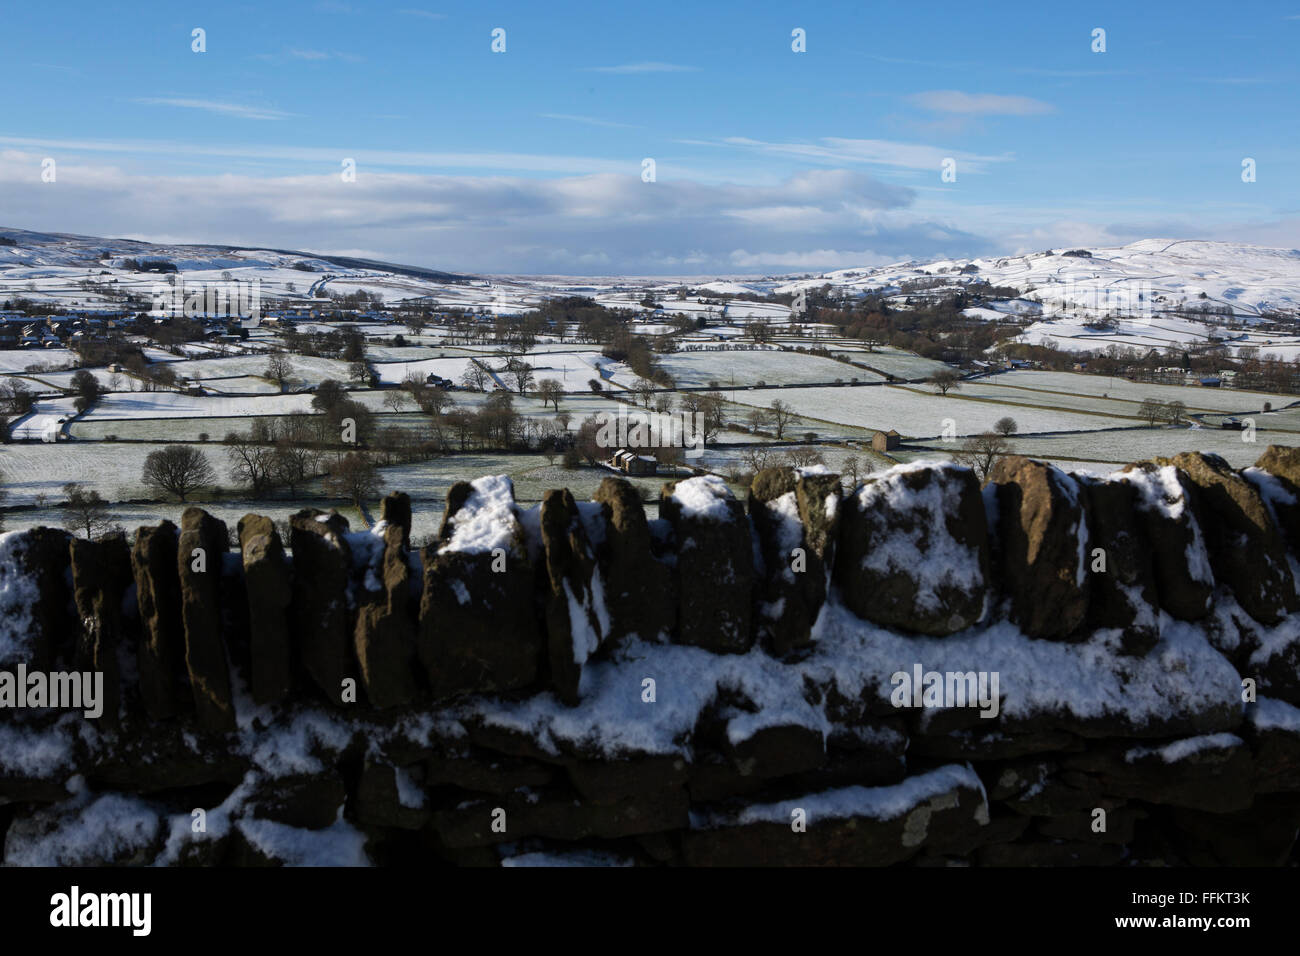 Countryside in Upper Teesdale in County Durham, England. A dry stone wall runs through the wintry landscape. Stock Photo